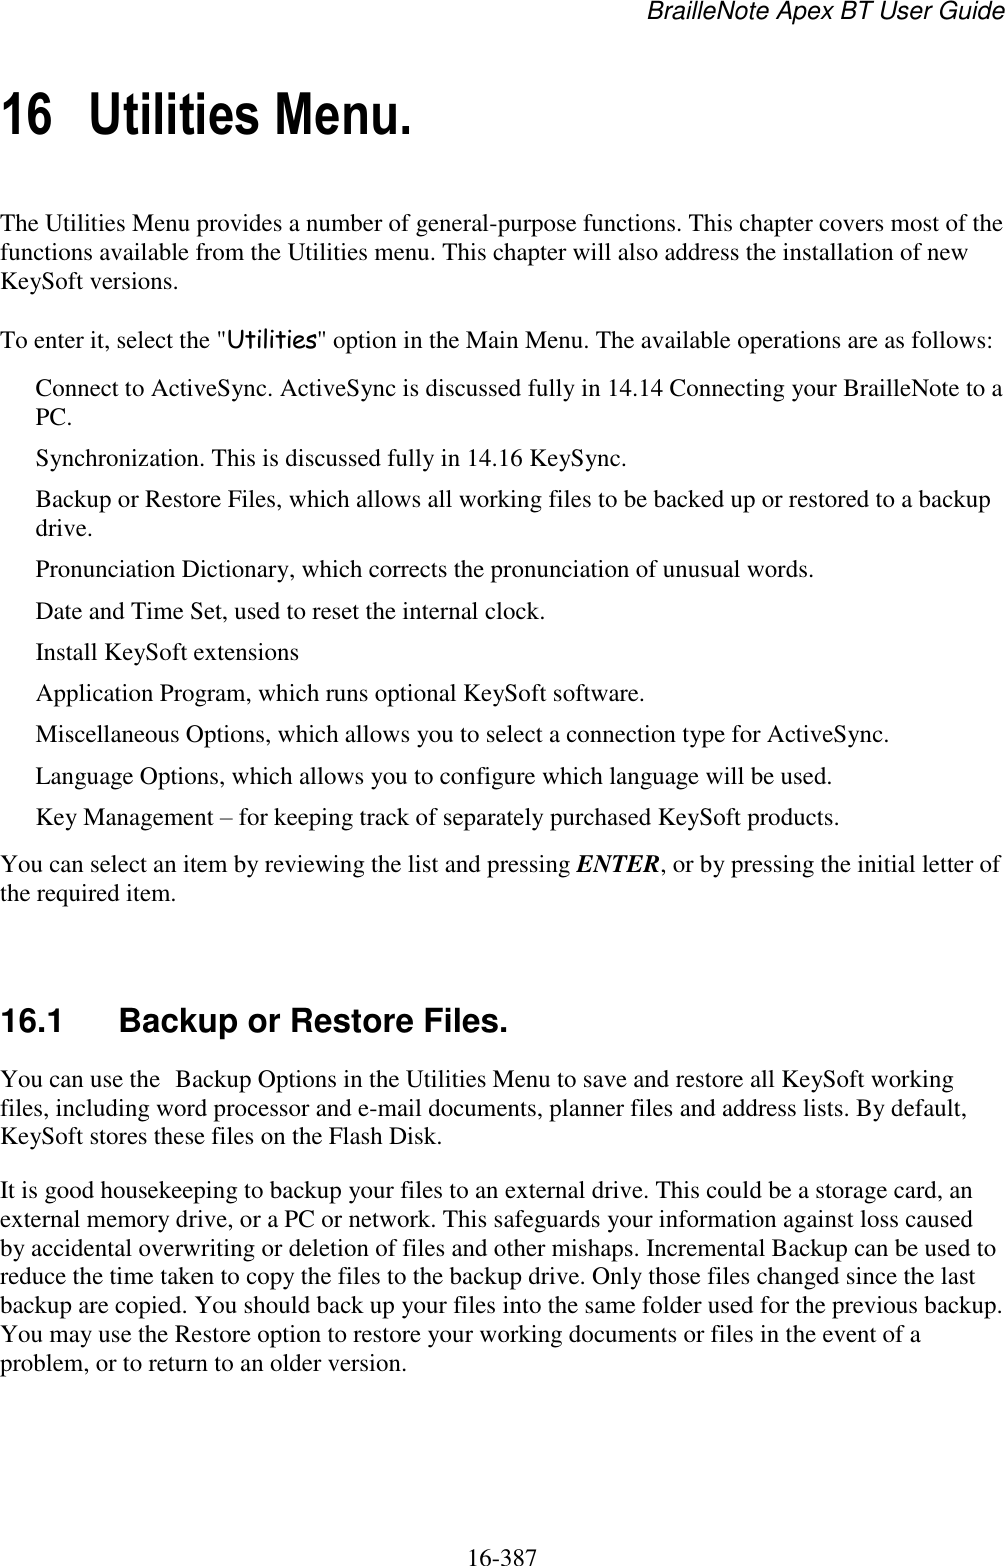 BrailleNote Apex BT User Guide   16-387   16 Utilities Menu. The Utilities Menu provides a number of general-purpose functions. This chapter covers most of the functions available from the Utilities menu. This chapter will also address the installation of new KeySoft versions.  To enter it, select the &quot;Utilities&quot; option in the Main Menu. The available operations are as follows: Connect to ActiveSync. ActiveSync is discussed fully in 14.14 Connecting your BrailleNote to a PC. Synchronization. This is discussed fully in 14.16 KeySync. Backup or Restore Files, which allows all working files to be backed up or restored to a backup drive. Pronunciation Dictionary, which corrects the pronunciation of unusual words. Date and Time Set, used to reset the internal clock. Install KeySoft extensions Application Program, which runs optional KeySoft software. Miscellaneous Options, which allows you to select a connection type for ActiveSync. Language Options, which allows you to configure which language will be used.  Key Management – for keeping track of separately purchased KeySoft products. You can select an item by reviewing the list and pressing ENTER, or by pressing the initial letter of the required item.   16.1  Backup or Restore Files. You can use the Backup Options in the Utilities Menu to save and restore all KeySoft working files, including word processor and e-mail documents, planner files and address lists. By default, KeySoft stores these files on the Flash Disk. It is good housekeeping to backup your files to an external drive. This could be a storage card, an external memory drive, or a PC or network. This safeguards your information against loss caused by accidental overwriting or deletion of files and other mishaps. Incremental Backup can be used to reduce the time taken to copy the files to the backup drive. Only those files changed since the last backup are copied. You should back up your files into the same folder used for the previous backup. You may use the Restore option to restore your working documents or files in the event of a problem, or to return to an older version.   